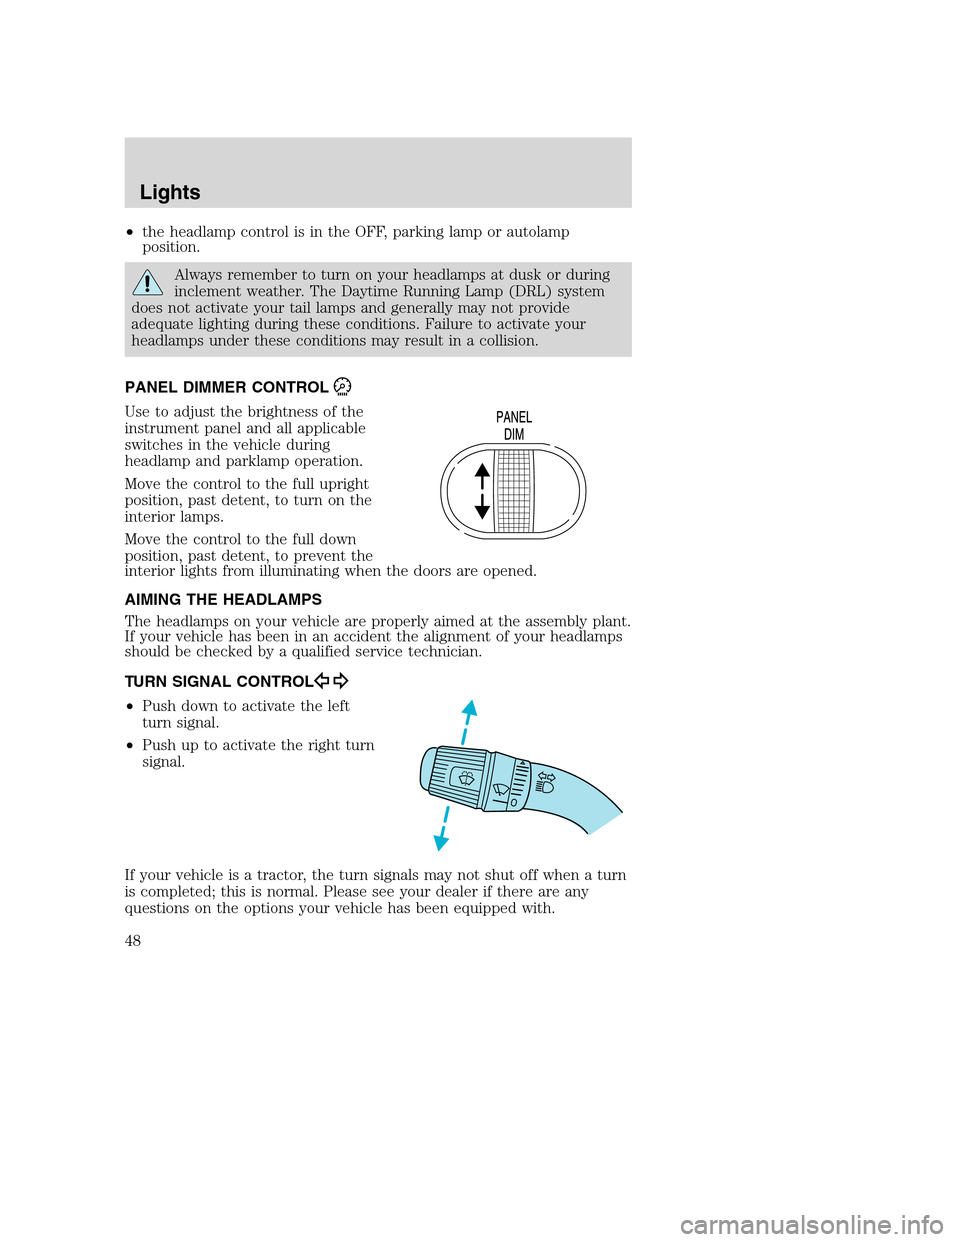 FORD F650 2005 11.G Owners Manual •the headlamp control is in the OFF, parking lamp or autolamp
position.
Always remember to turn on your headlamps at dusk or during
inclement weather. The Daytime Running Lamp (DRL) system
does not 